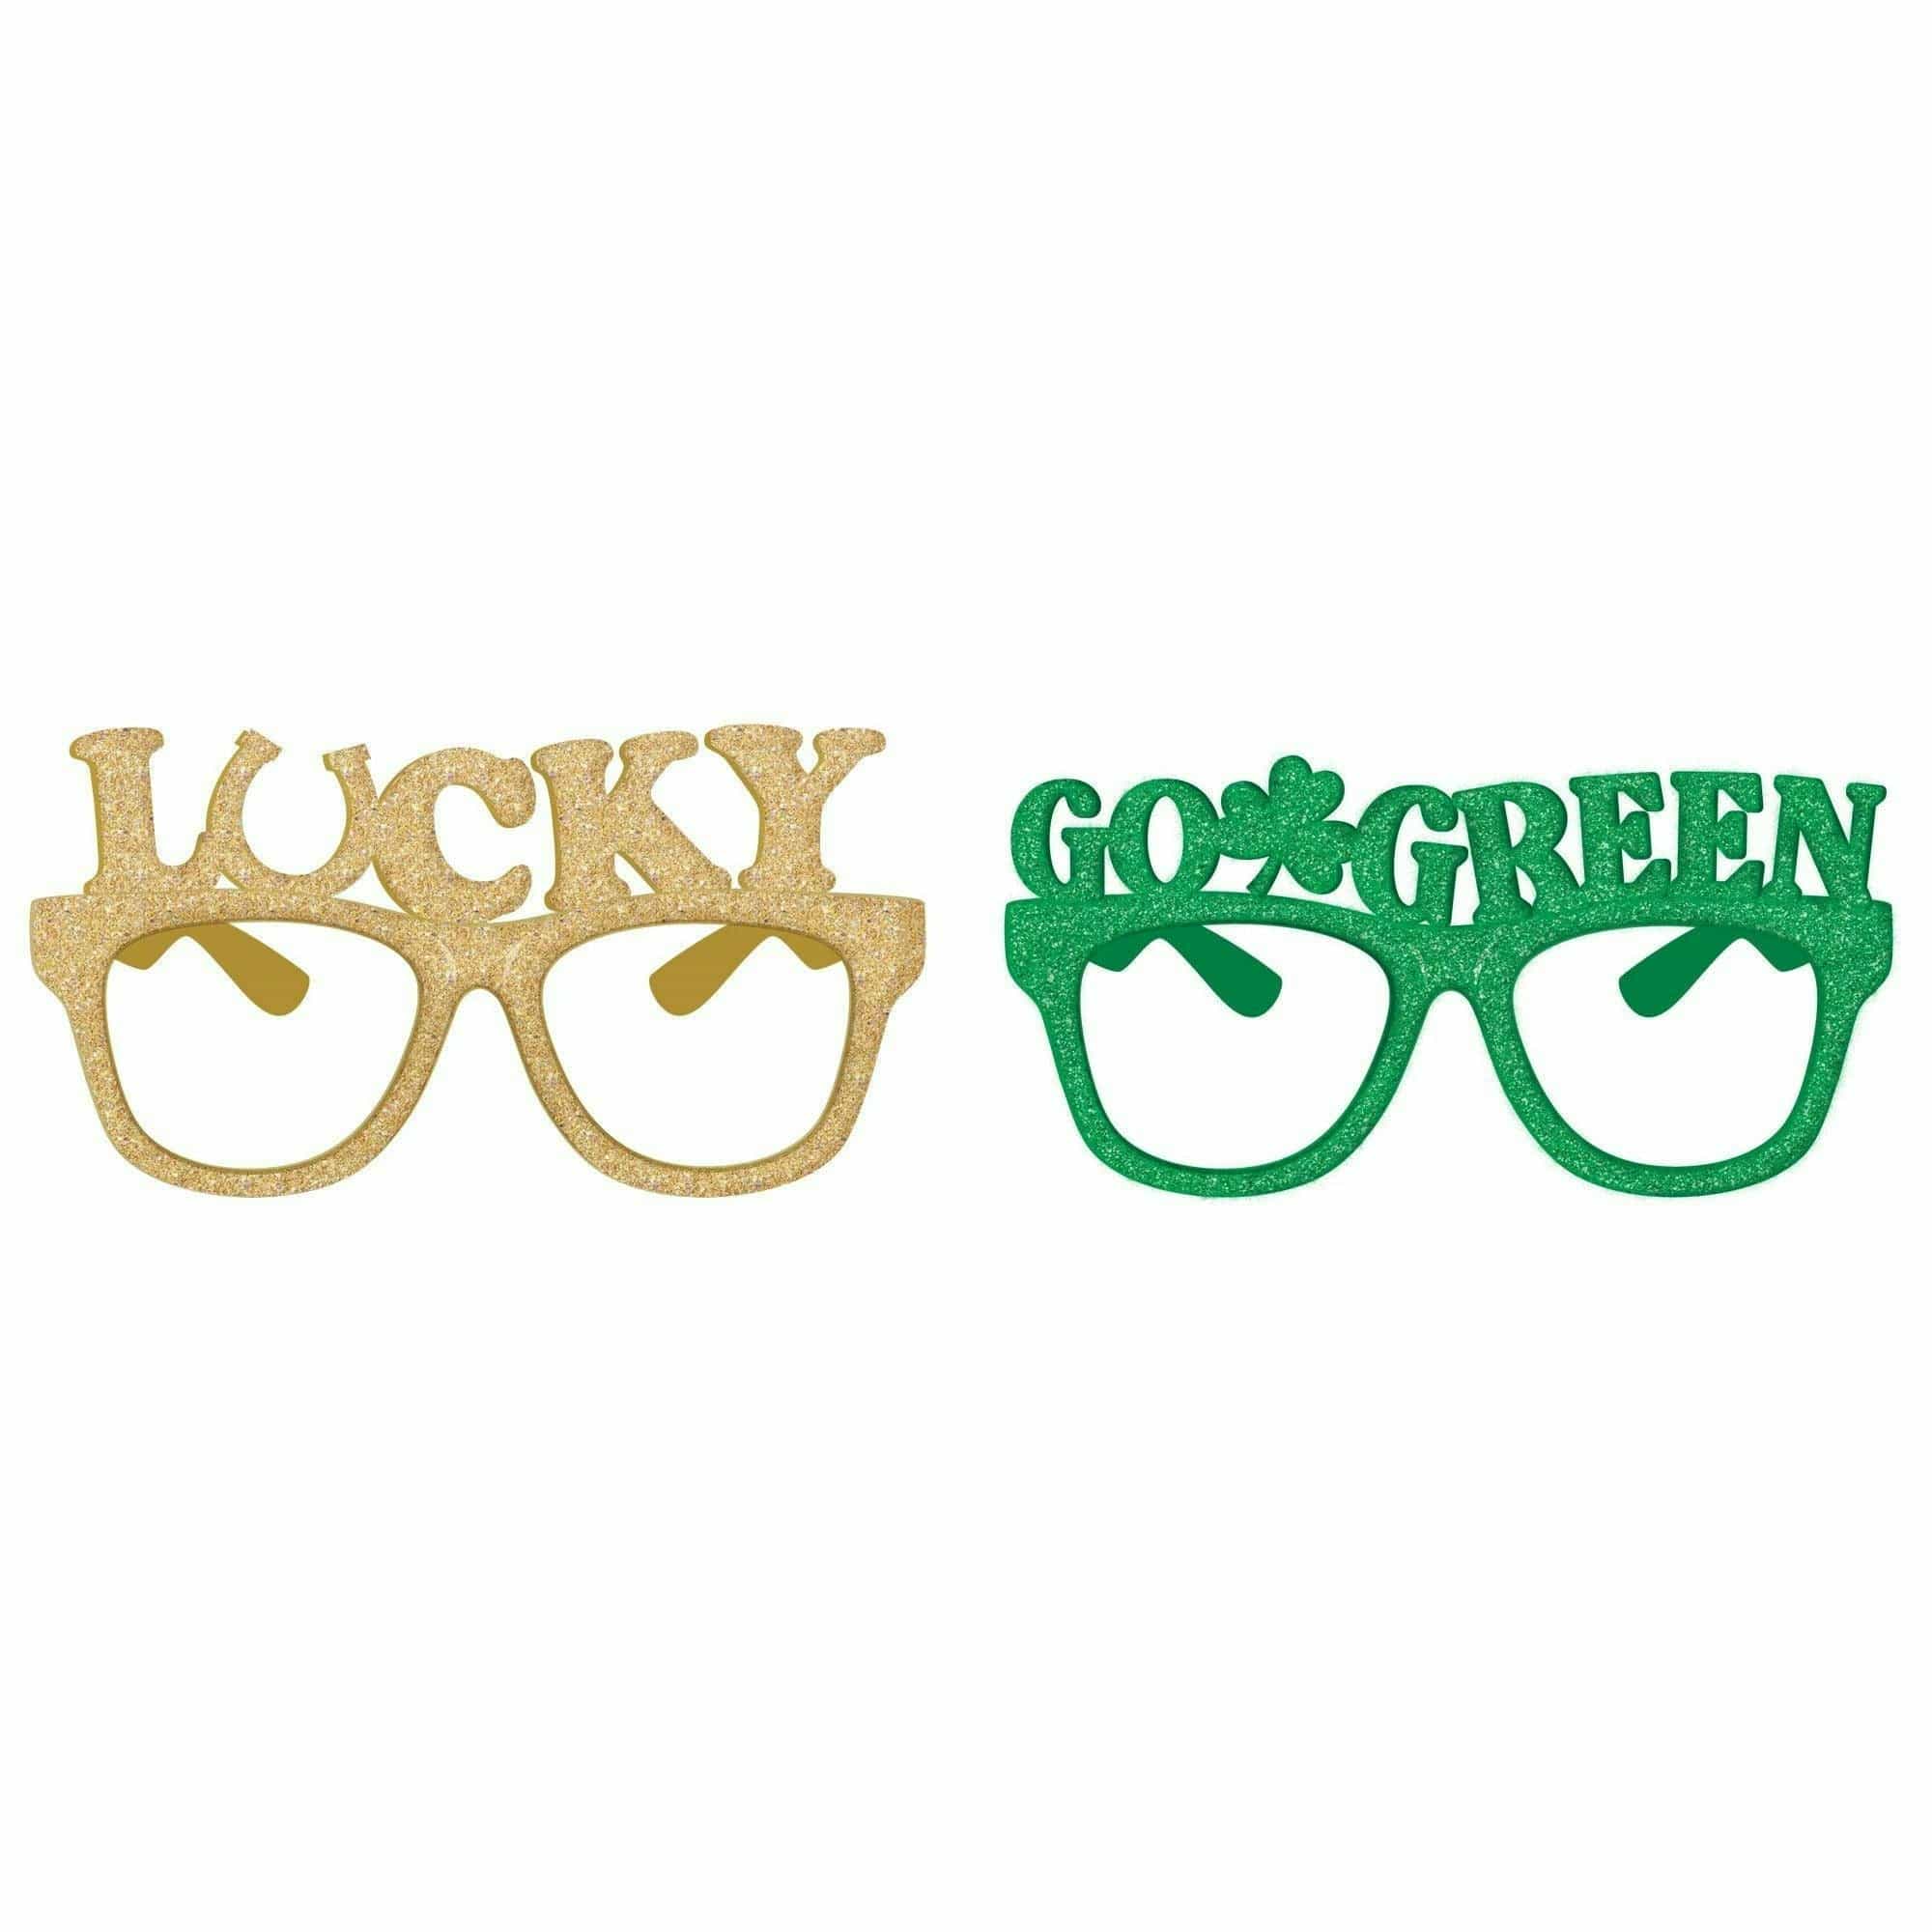 Amscan HOLIDAY: ST. PAT'S St. Patrick's Day Multi-Pack Glasses